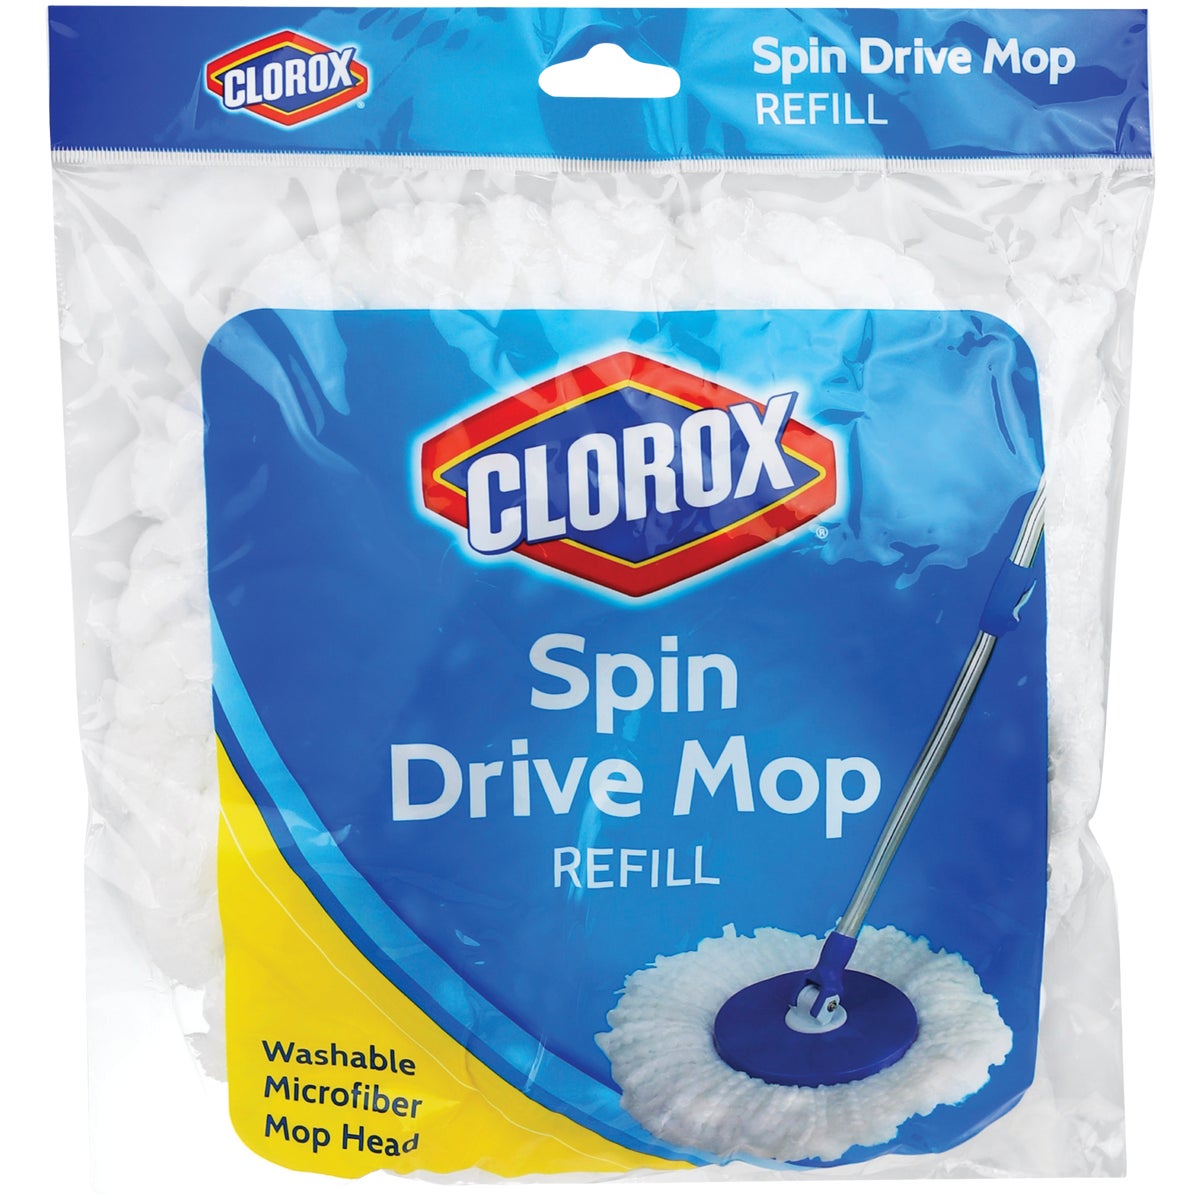 Clorox Deluxe Spin Mop Refill